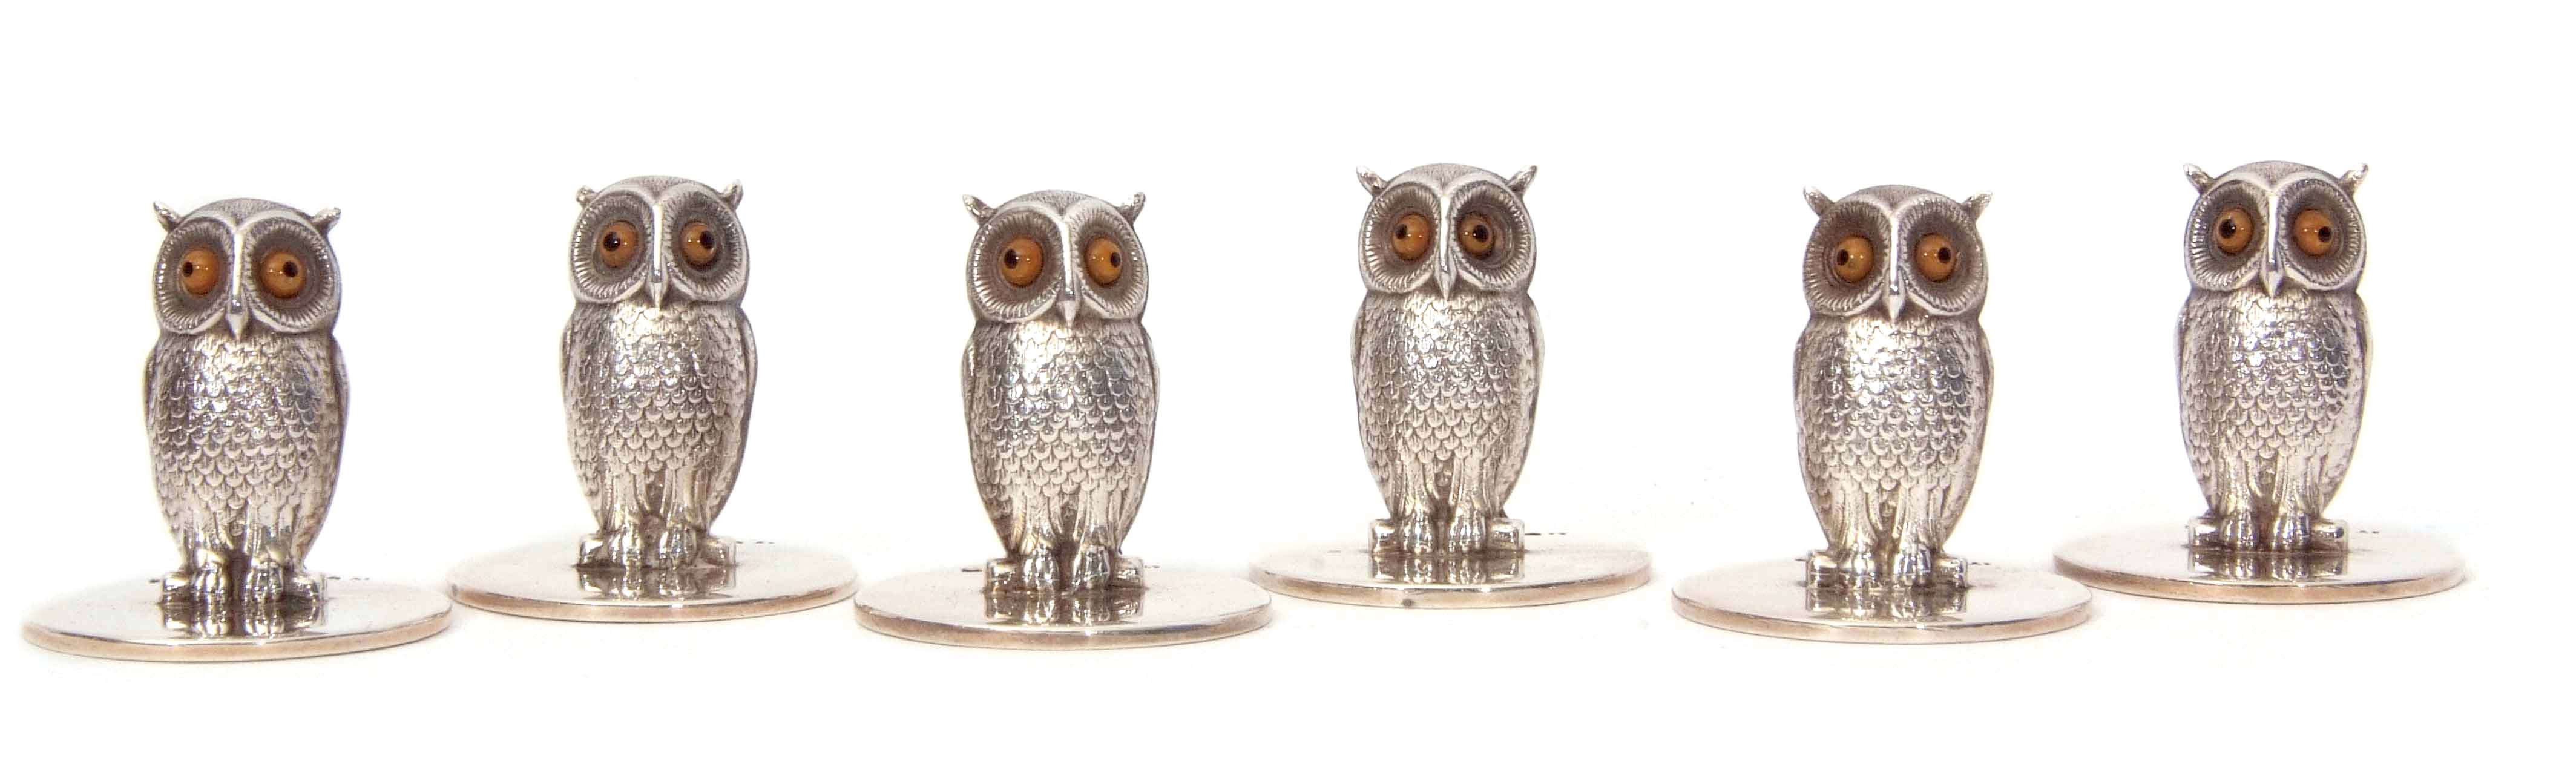 Cased set of six Edward VII place card/menu holders, each modelled in the form of a standing owl